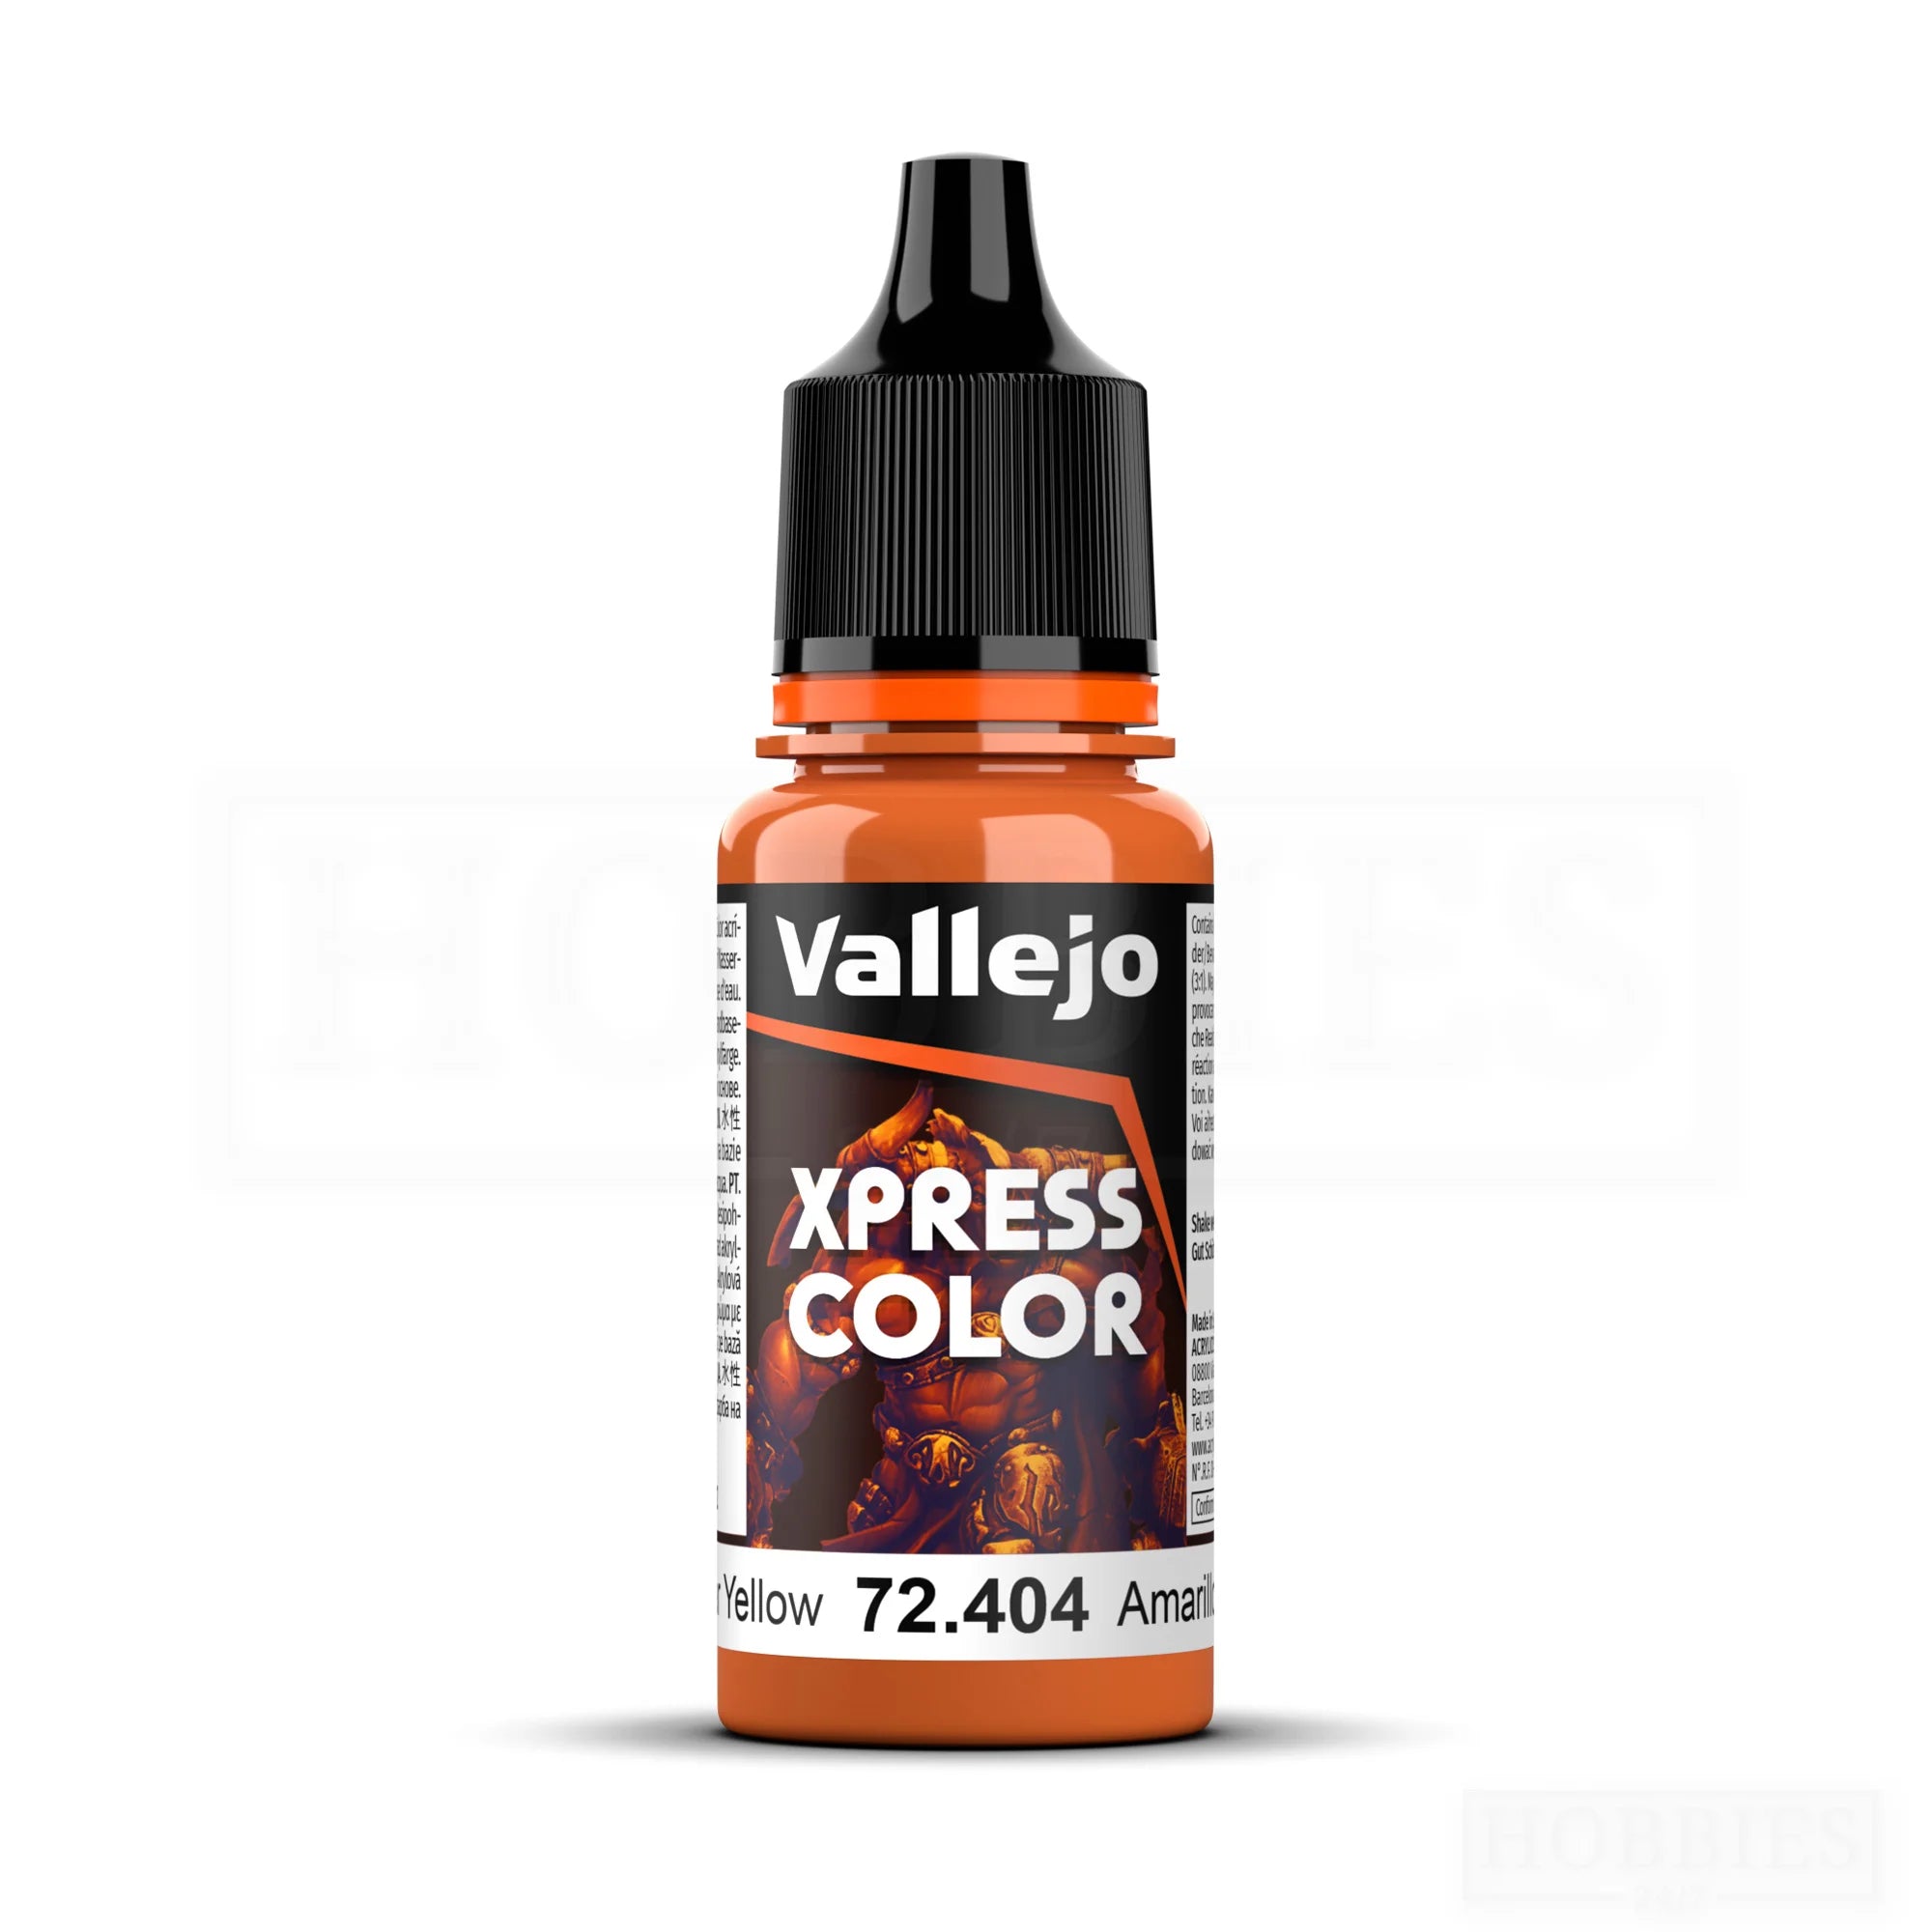 Vallejo Xpress Color Nuclear Yellow 18ml